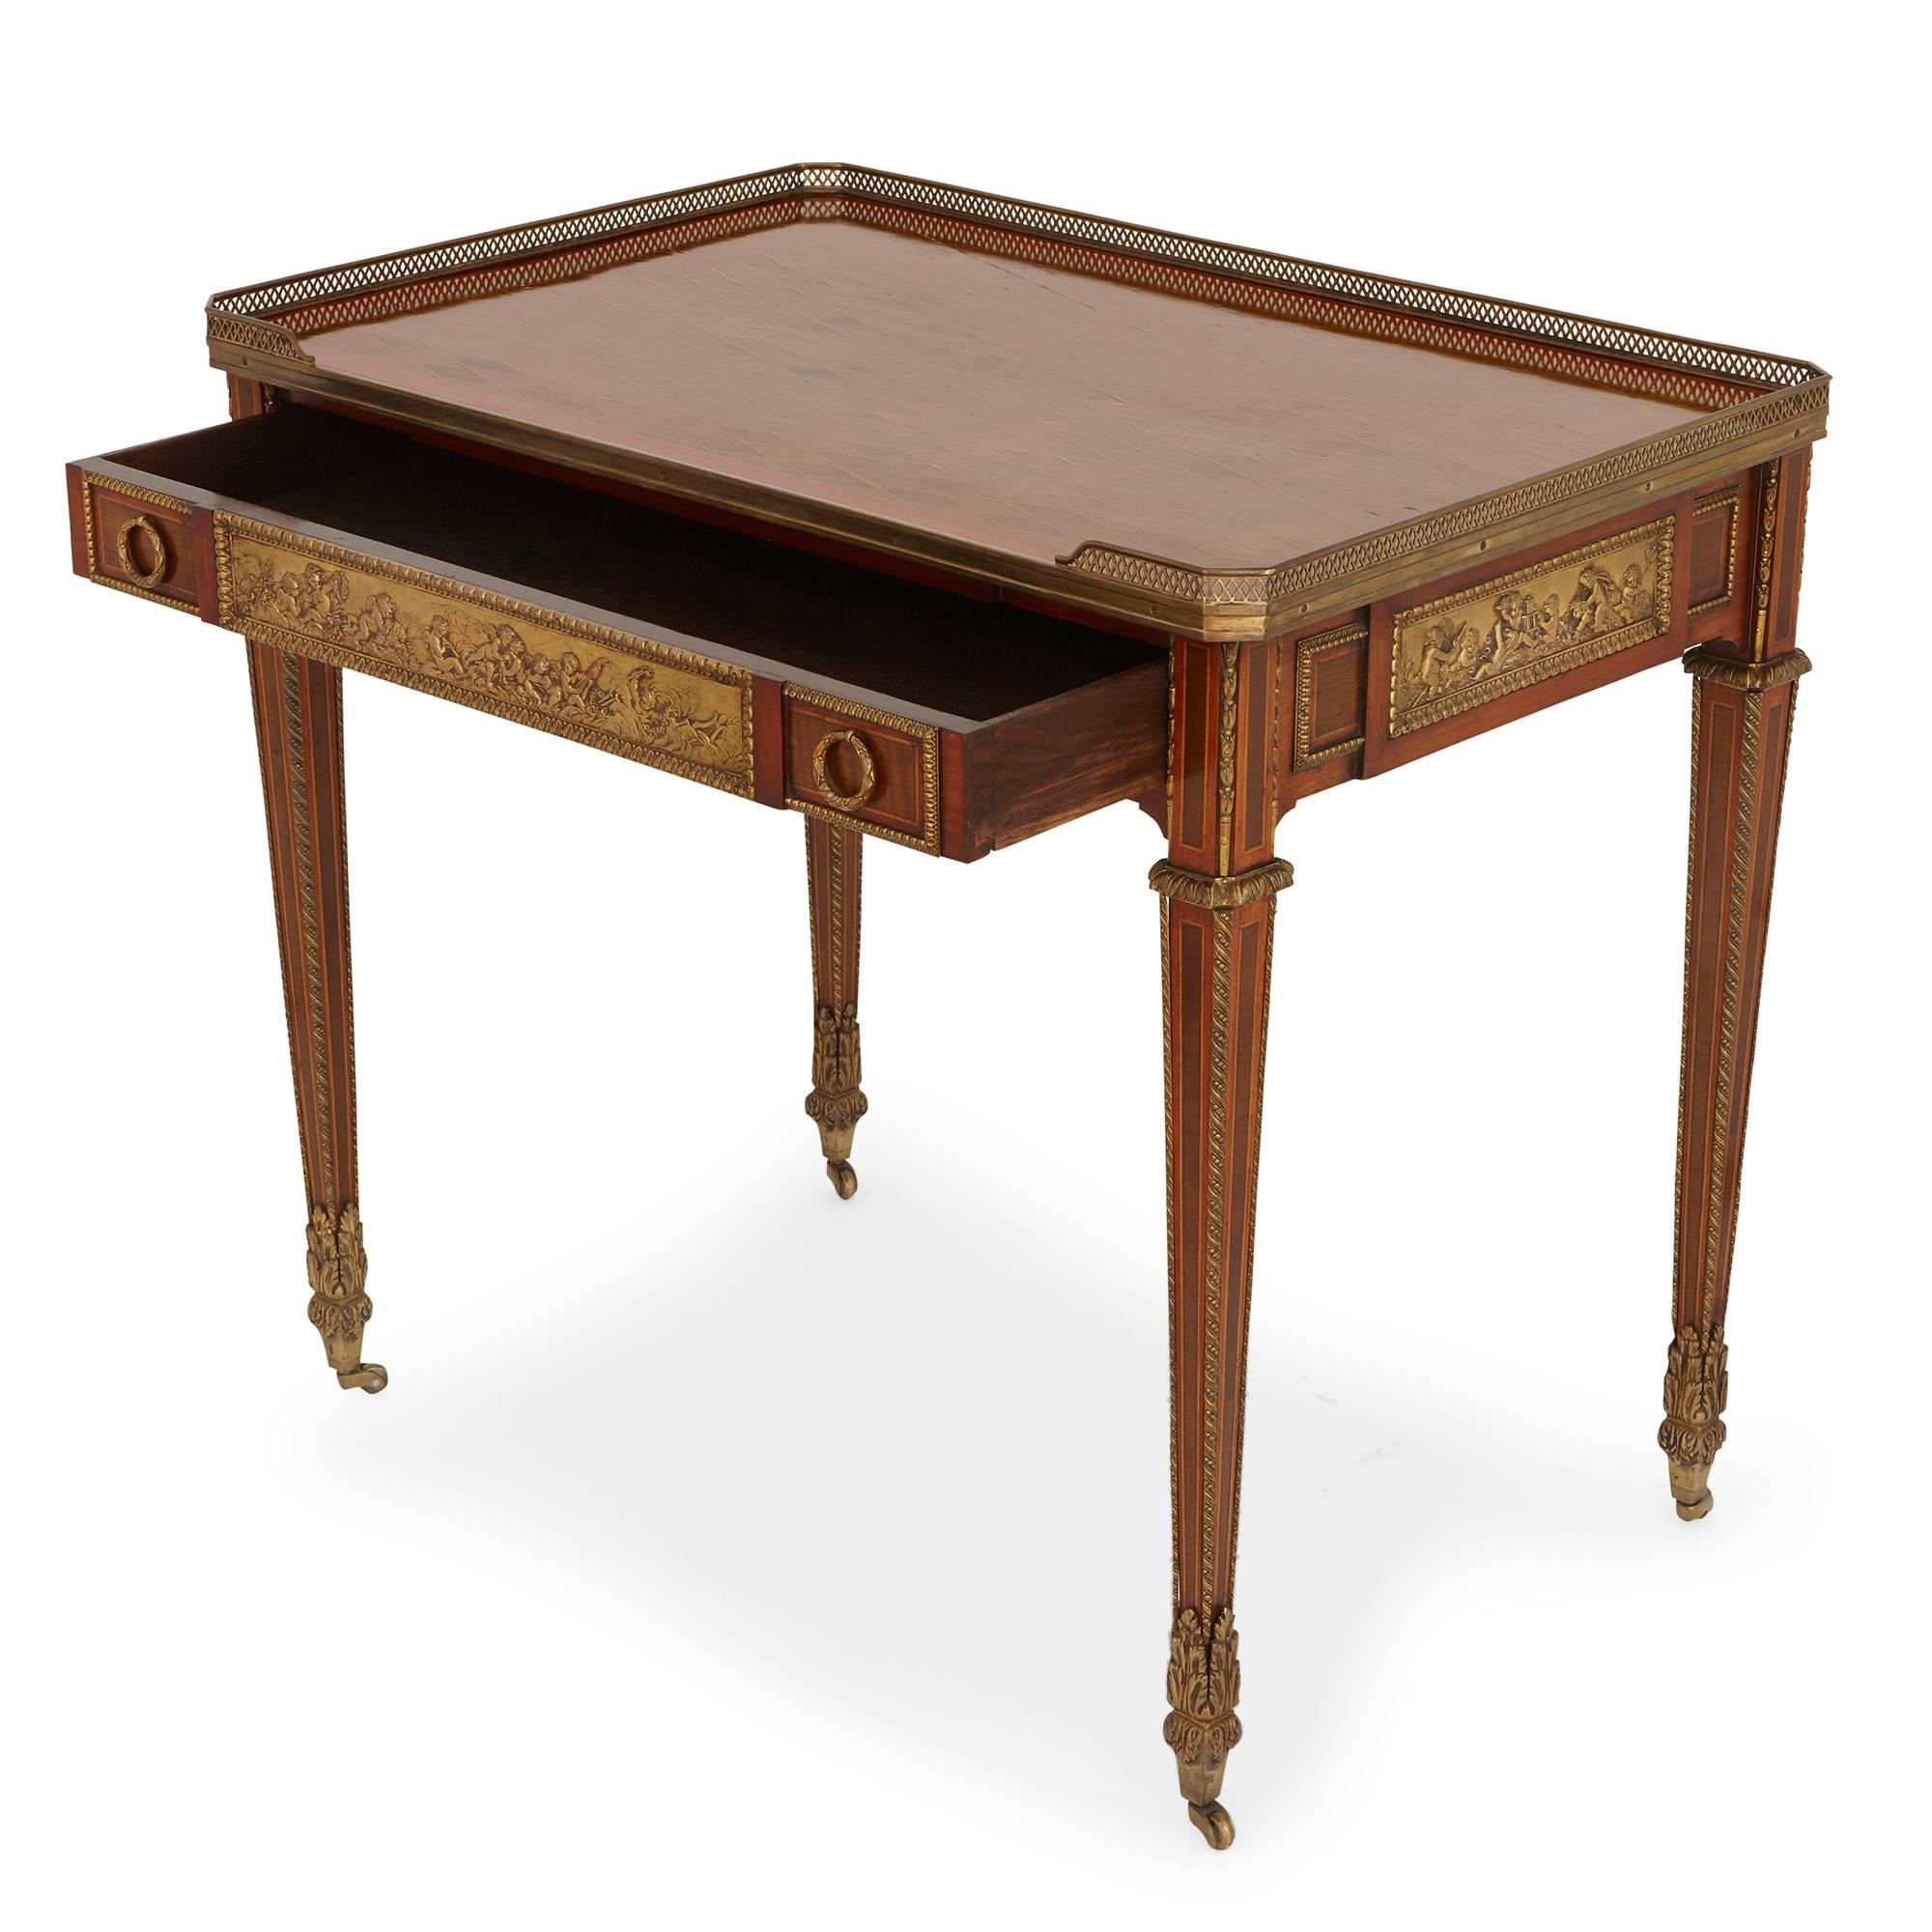 Louis XVI French Antique Ormolu Mounted Parquetry Writing Table, after Riesener